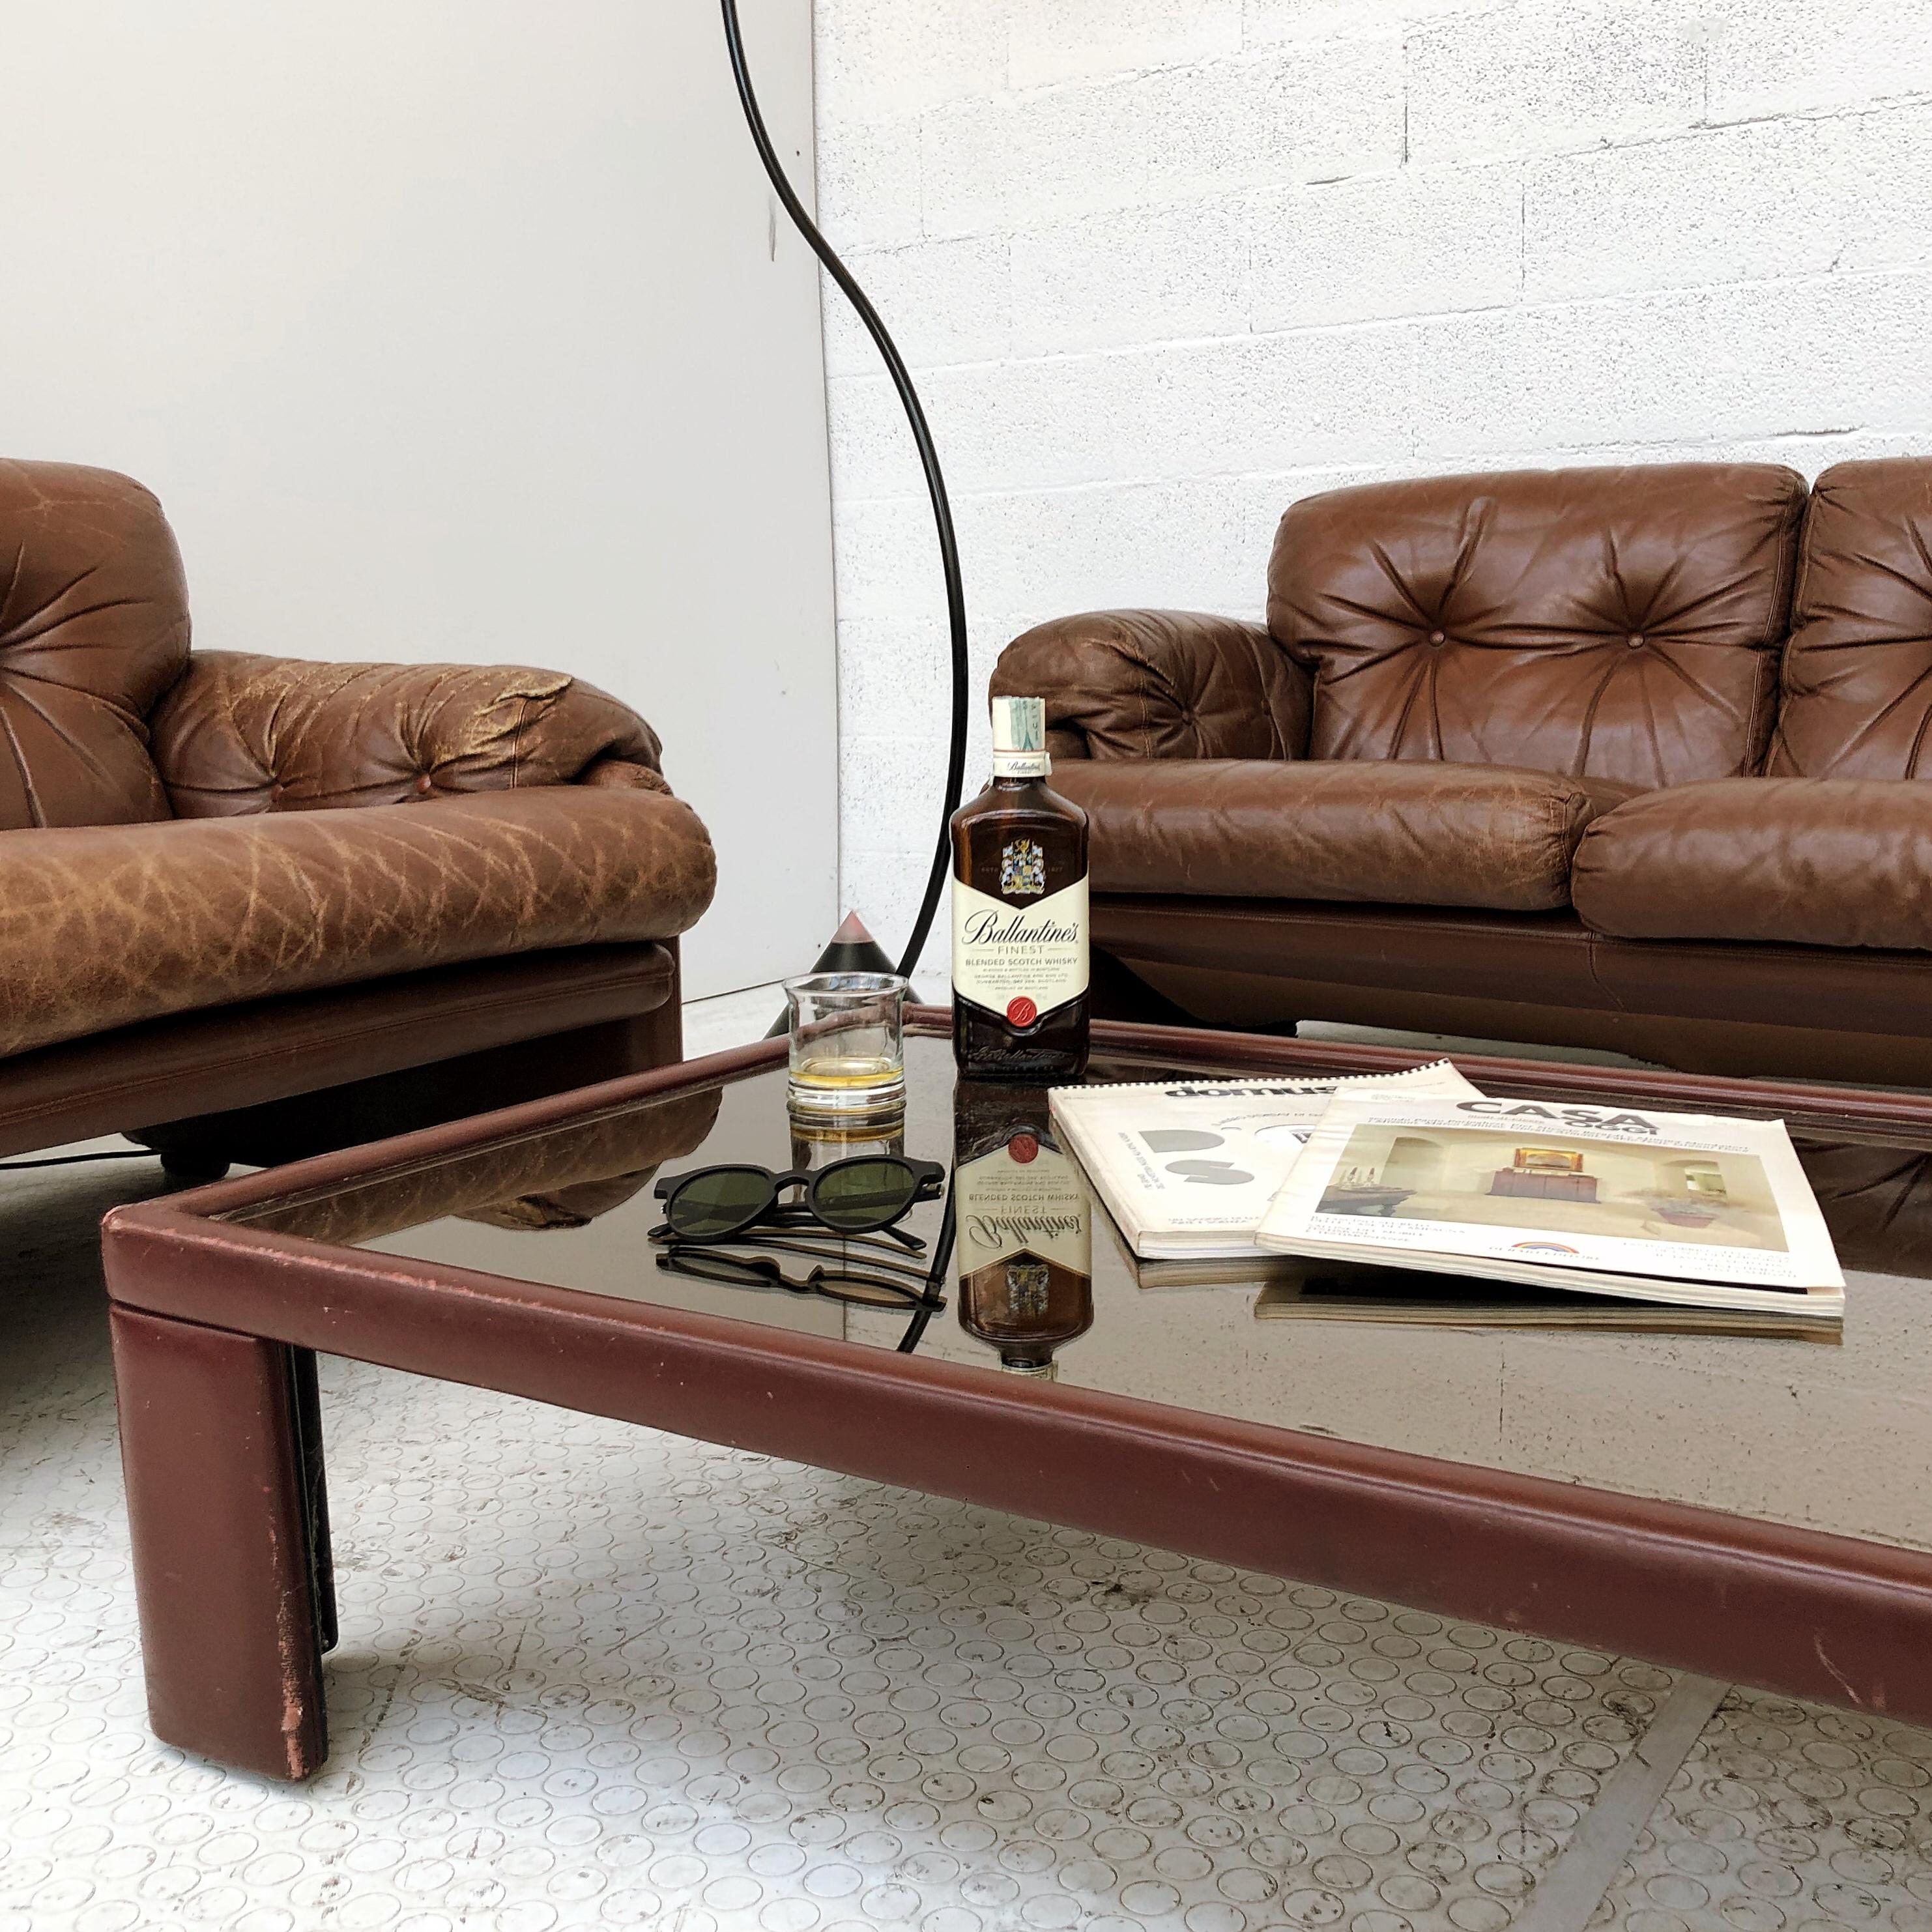 Afra and Tobia Scarpa Leather Coronado Living Room Set for C&B Italia, 1969 In Good Condition For Sale In Vicenza, IT